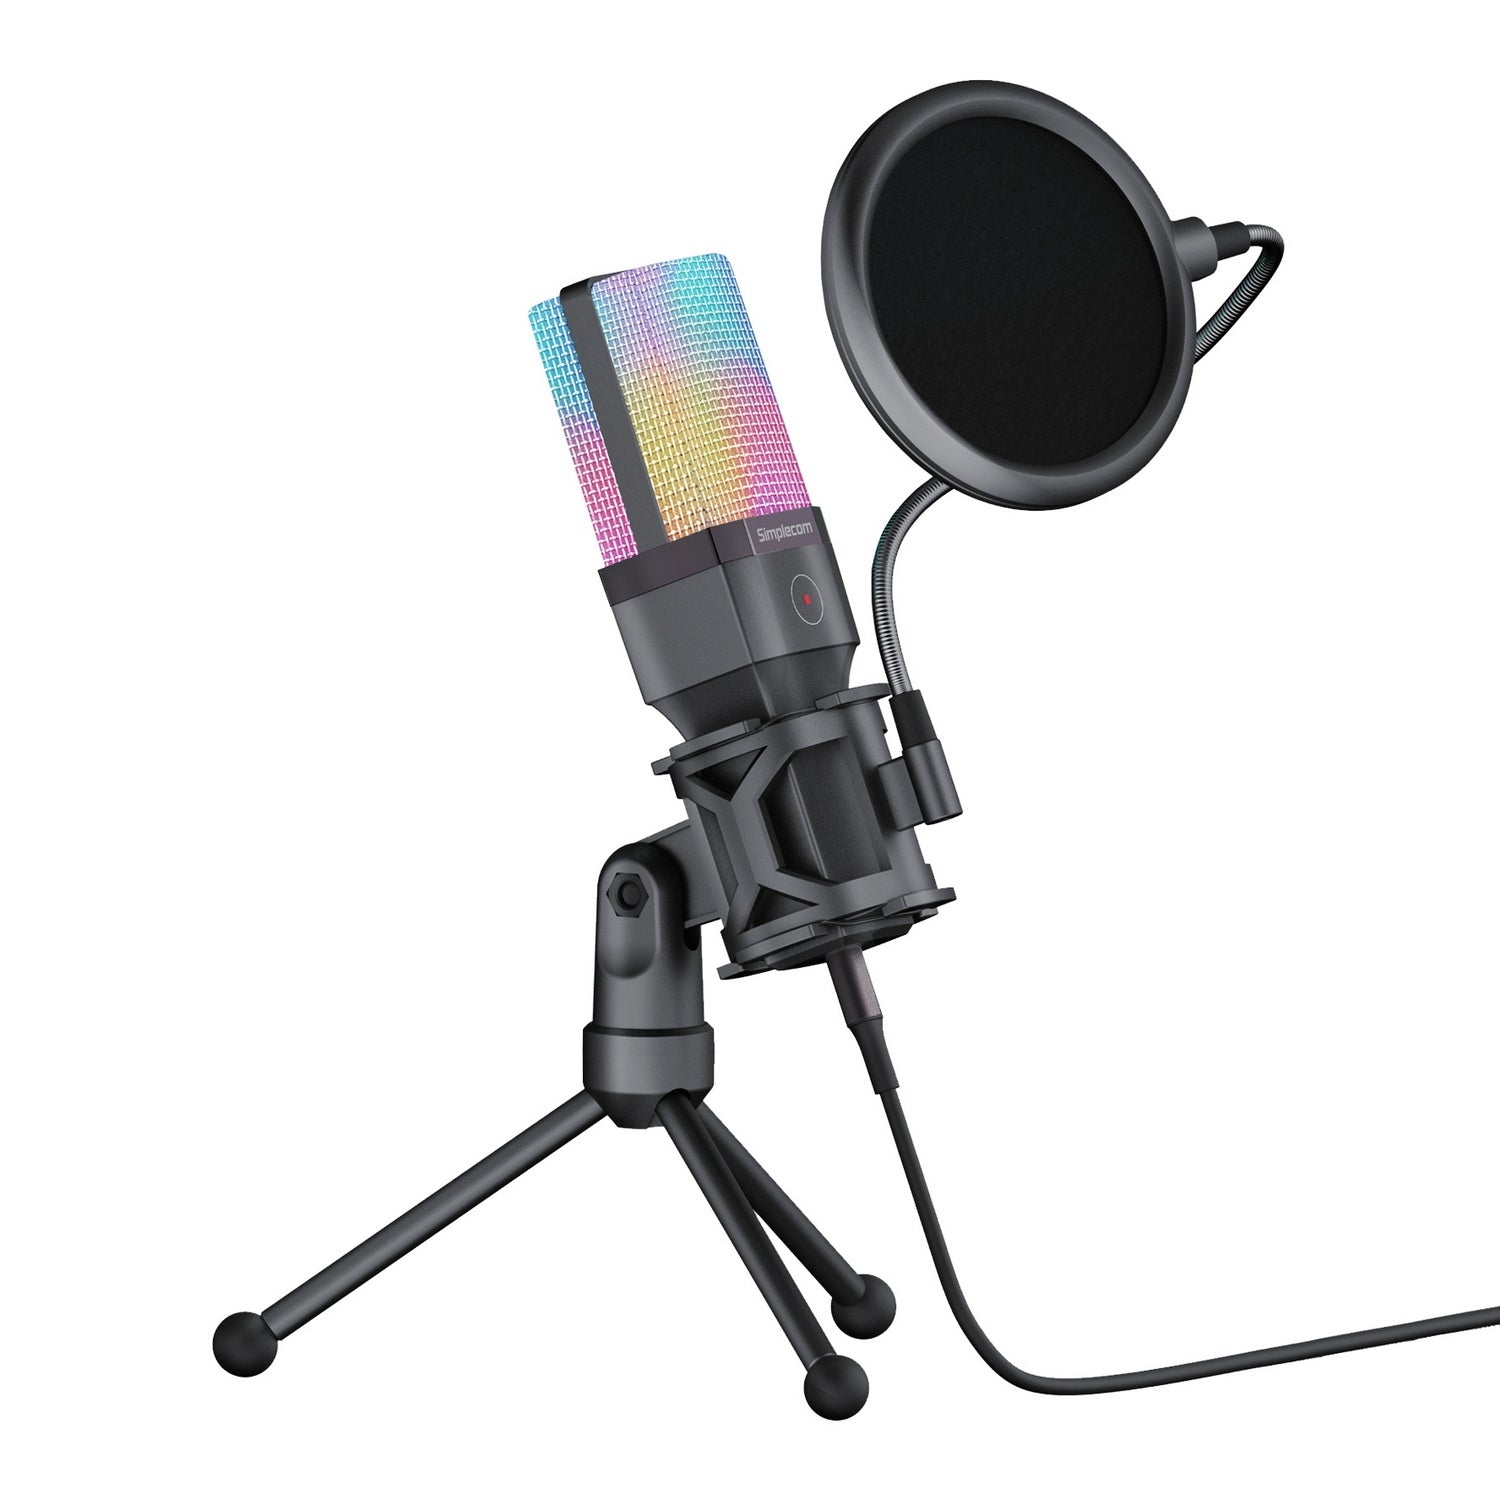 UM650 USB Cardioid Condenser Microphone Gaming RGB Lights with Tripod & Pop Filter